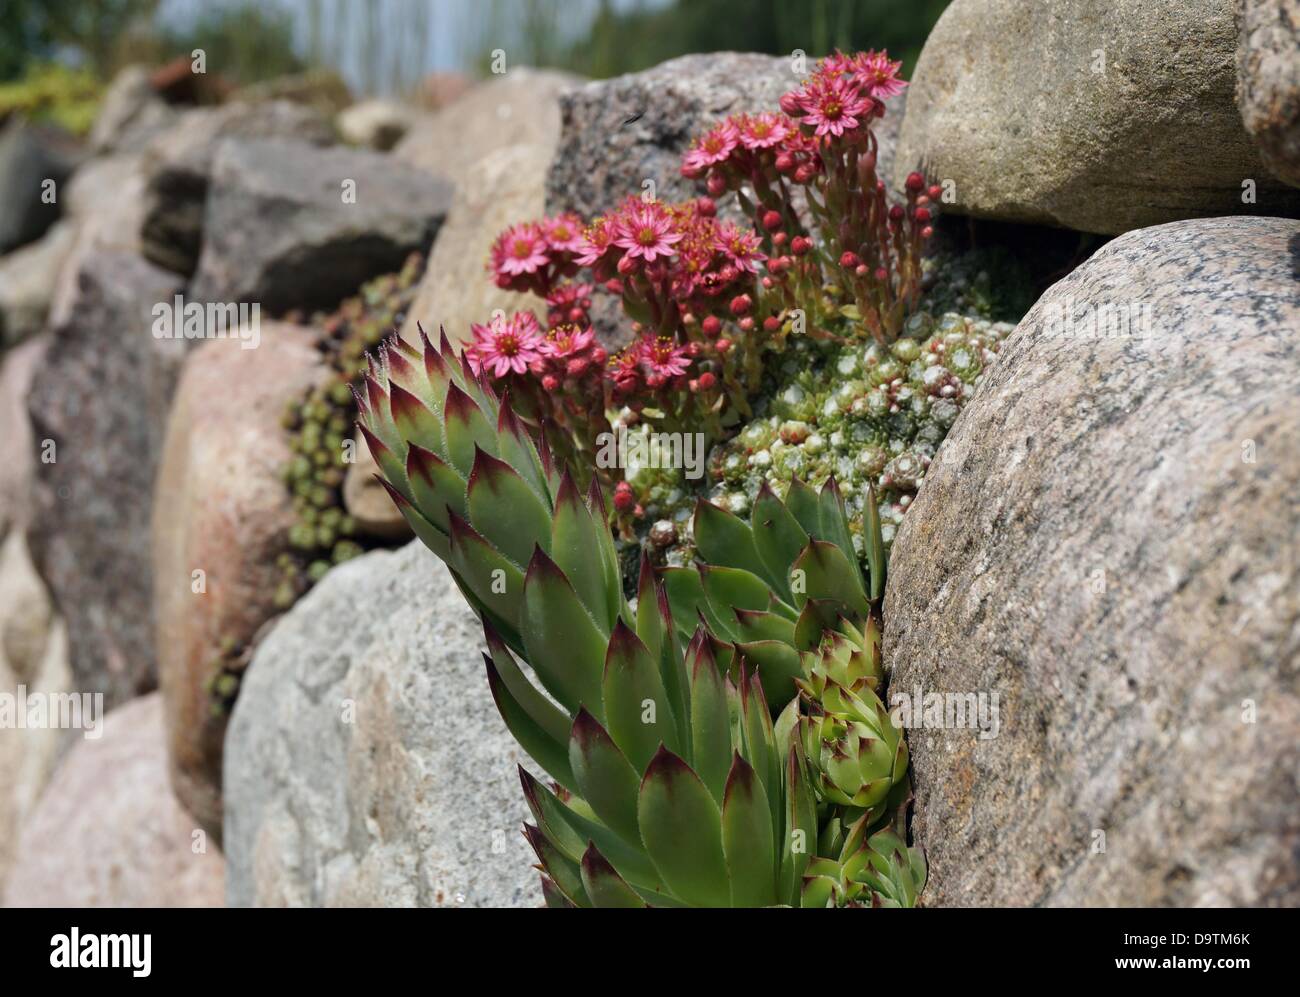 A Houseleek (Sempervivum marmoreum) grows in the joints of a wall made of natural stones in a garden near Ludwigslust, Germany, 10 June 2013. Photo: SOEREN STACHE Stock Photo